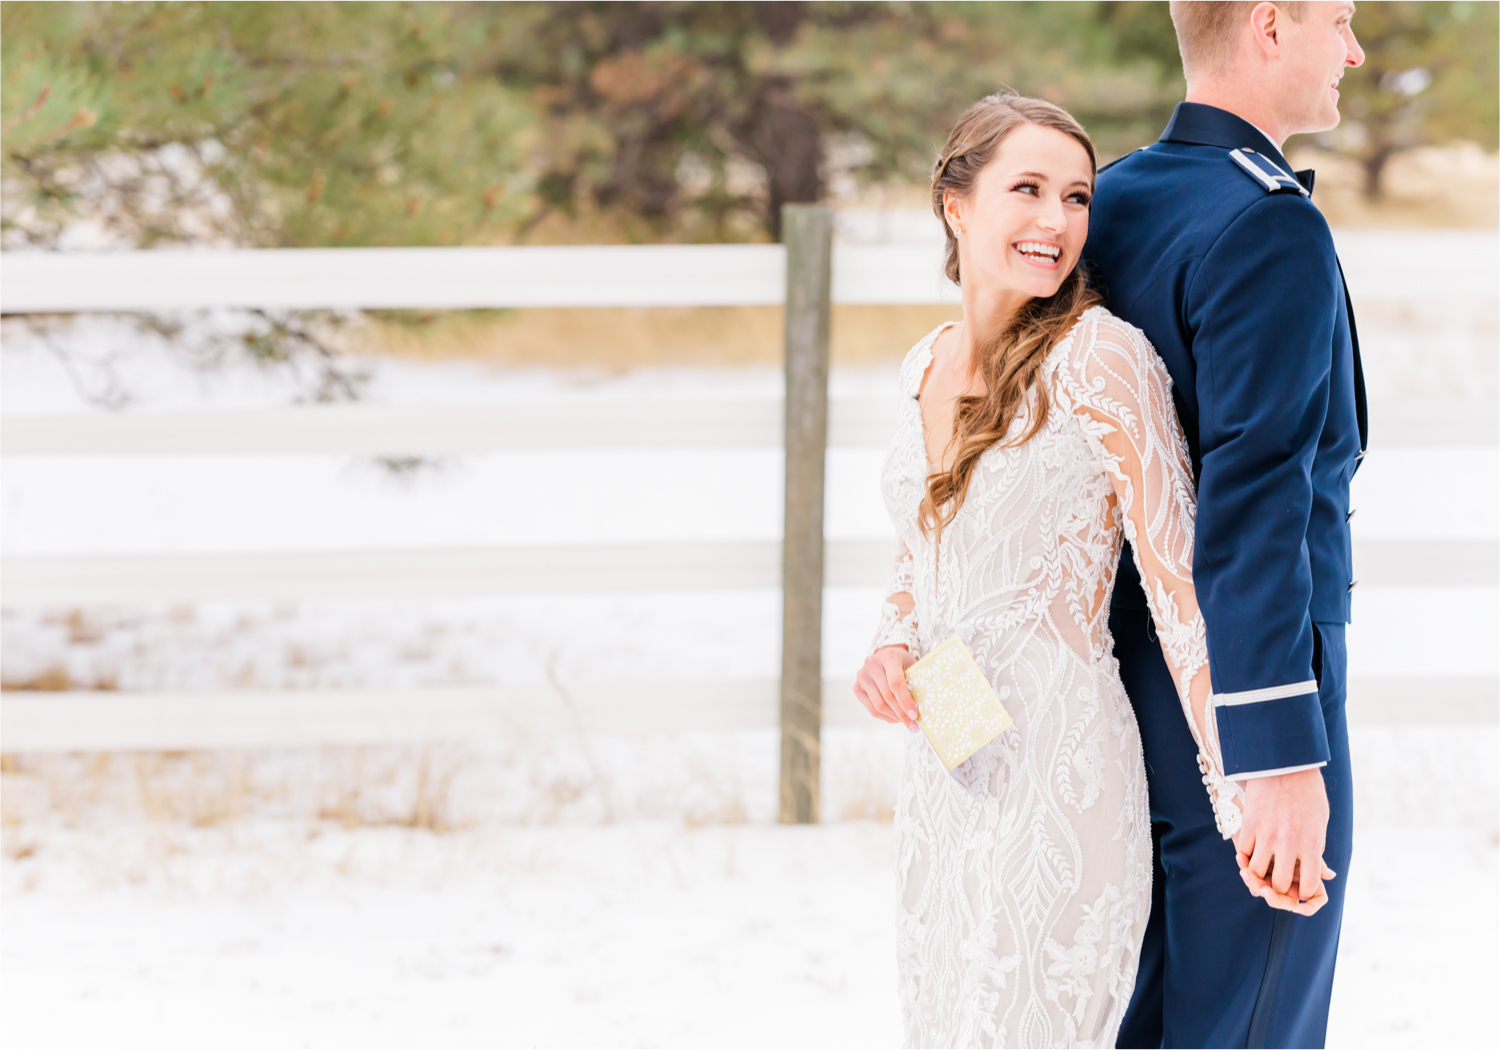 Winter Wonderland Wedding in Colorado Springs | Britni Girard Photography Colorado Wedding Photography and Film Team | Snow covered mountains and Christmas just a few days away | Annika + John's Nostalgic Winter Wedding | Bride's Dress iDream Bridal Essence of Australia | Air Force Academy | First Look in Snow and Bride and Groom Letters back to back